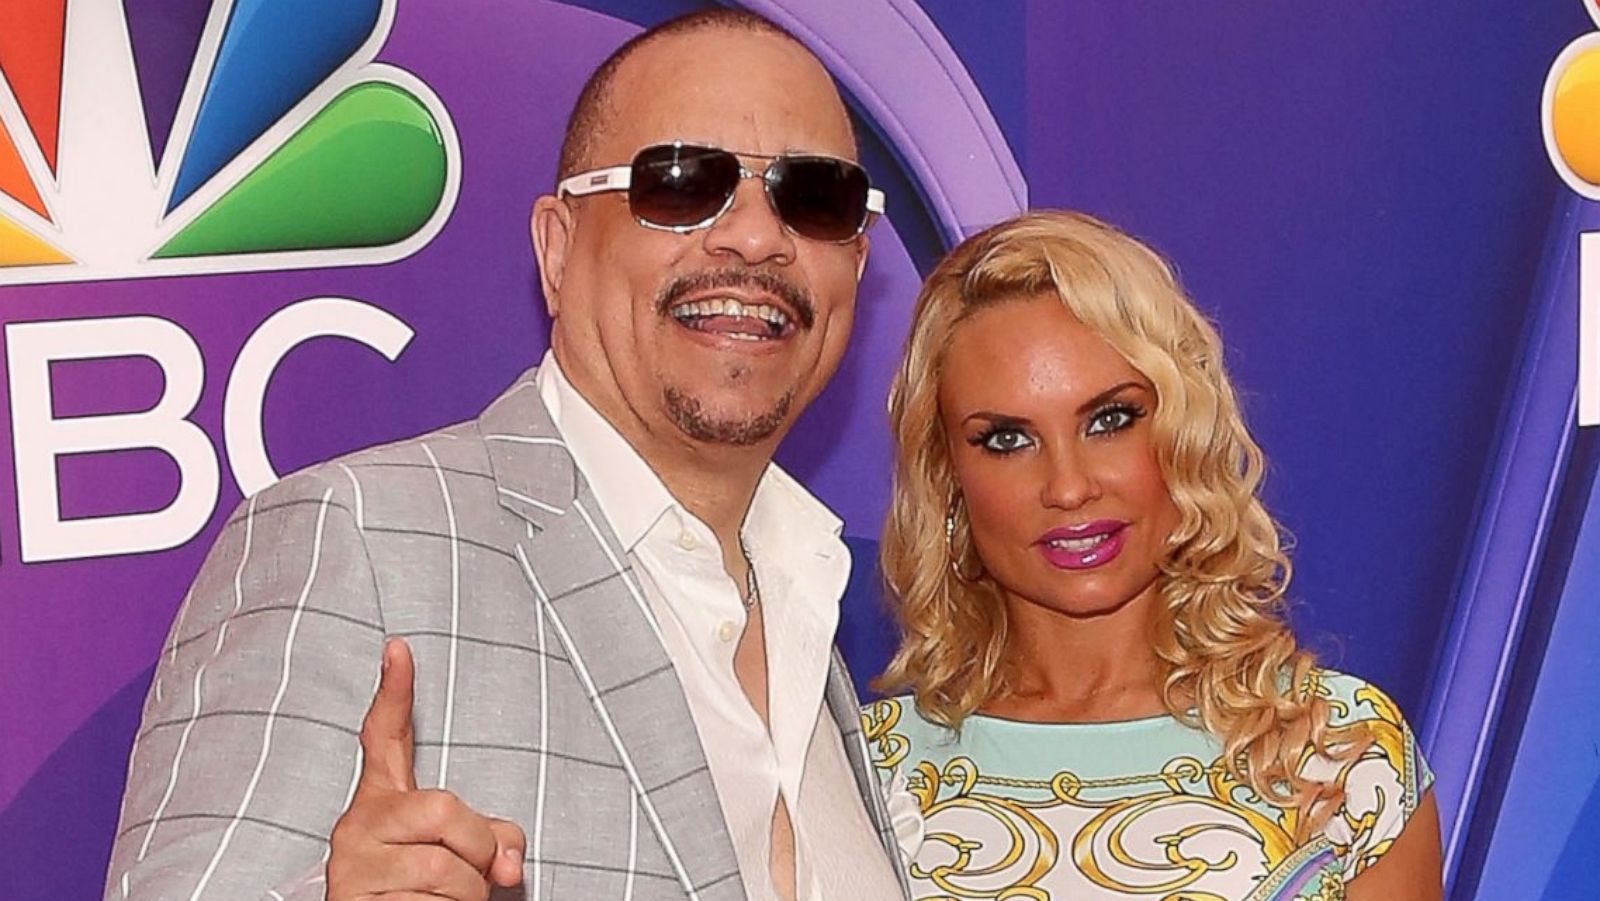 Rapper Ice T and Wife Coco Expecting